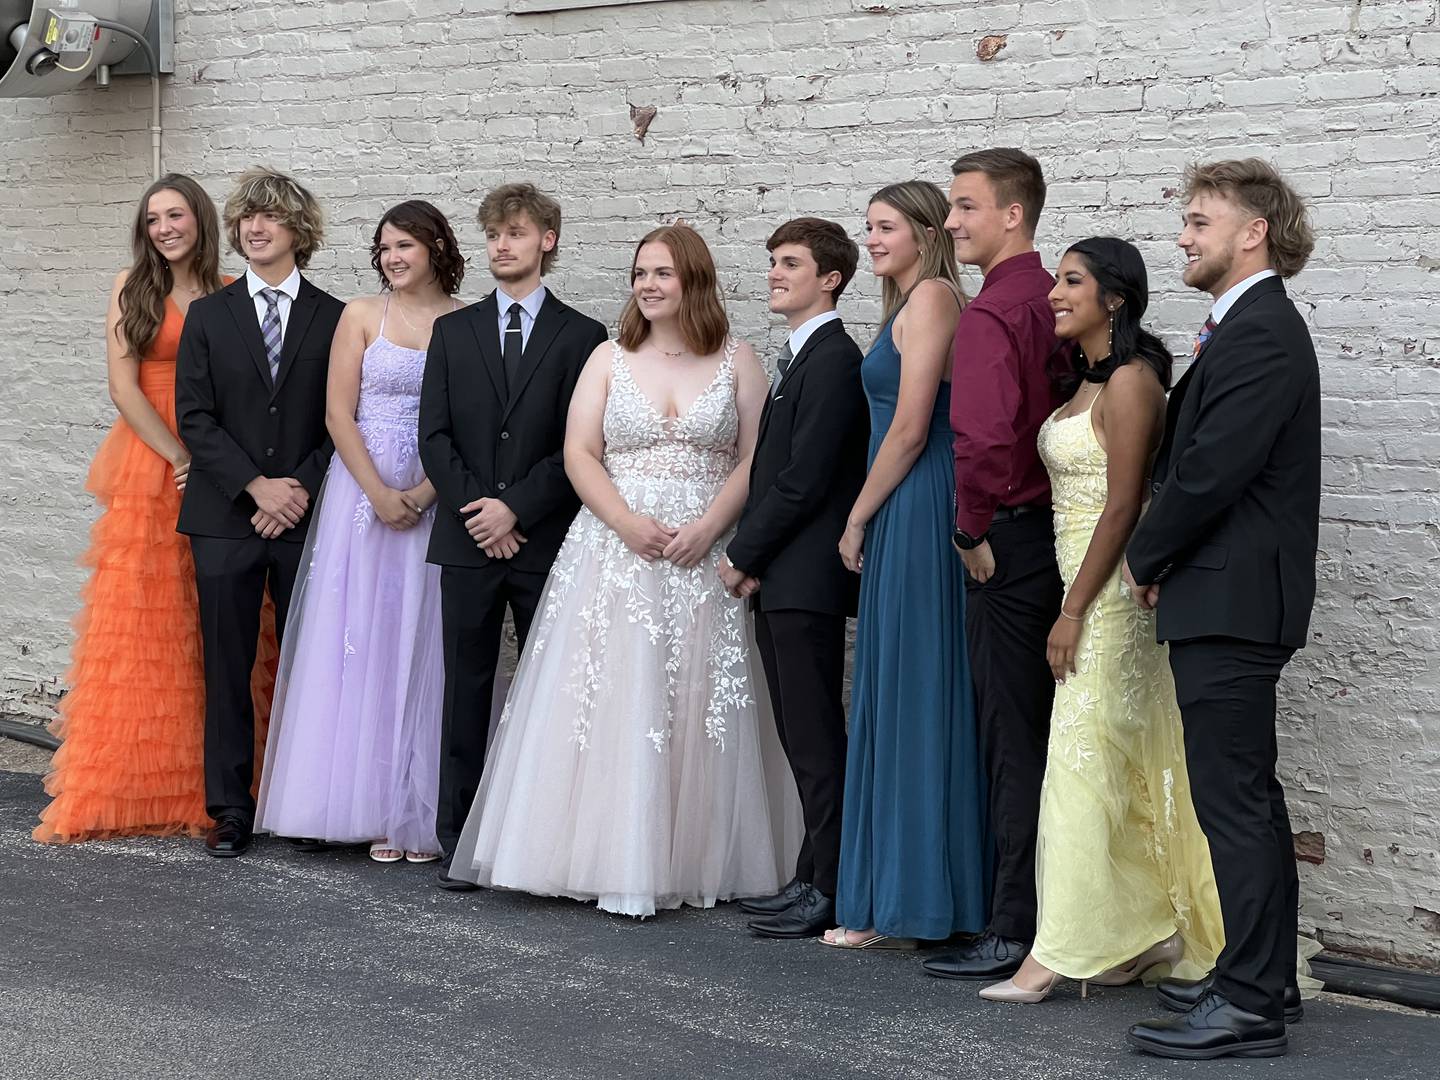 The 10 finalists of the 87th annual King and Queen Scholarship competition stand together before walking on the Genoa Days main stage on June 7, 2023. From left to right: Bailey Botterman, Aiden Awe, Molly Johnson, Nathan Brening, Corinne Lavelle, Trevor Finley, Kaitlin Rahn, Zachary Neblock, Citlani Serna and Nolan Perry.